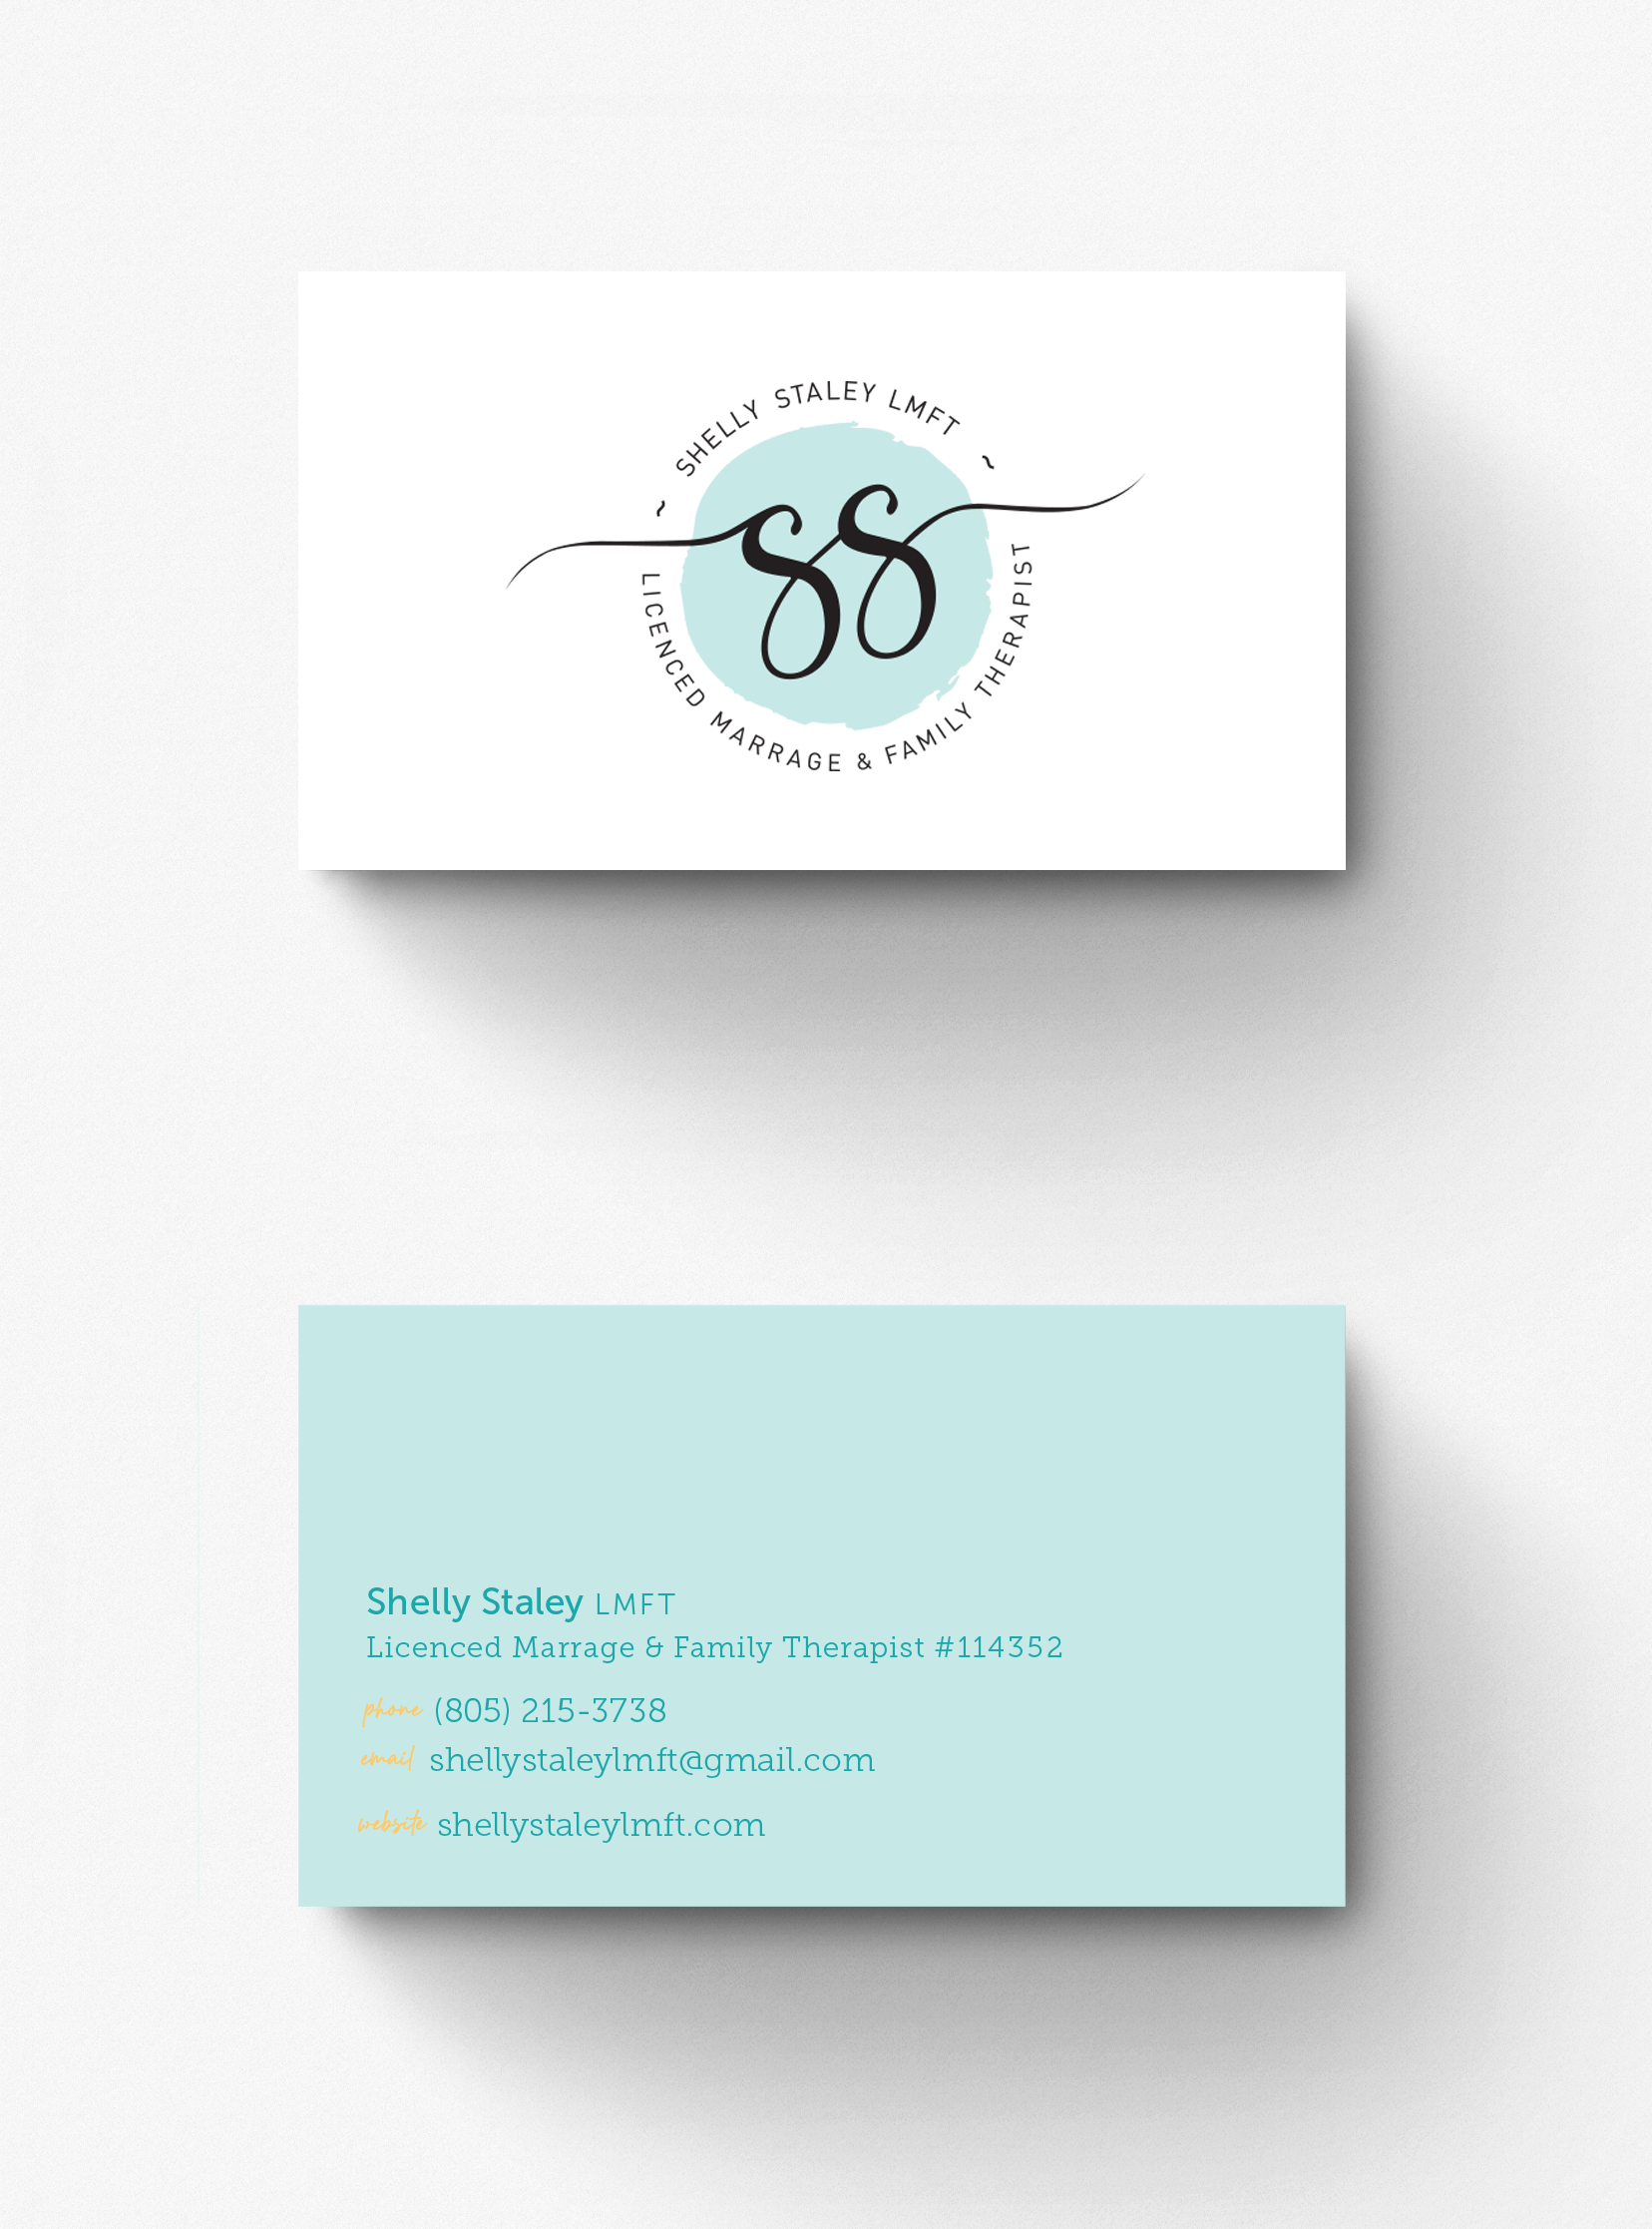 Shelly Staley LMFT Business Card